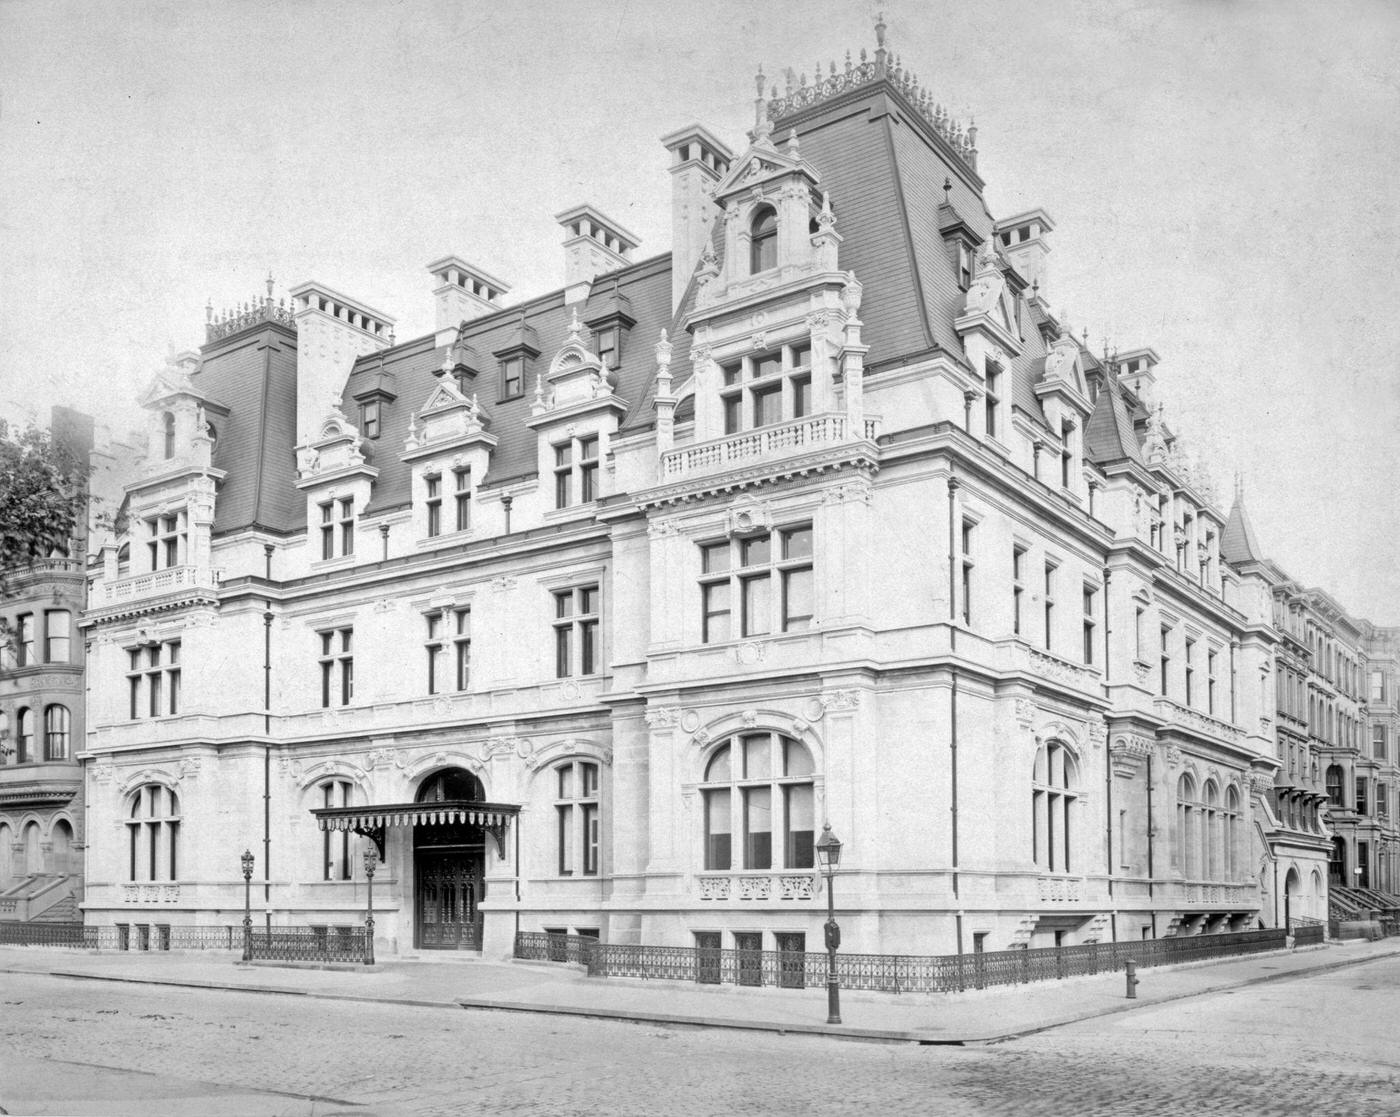 Astor Residence At 840 Fifth Avenue, New York City, 1893.